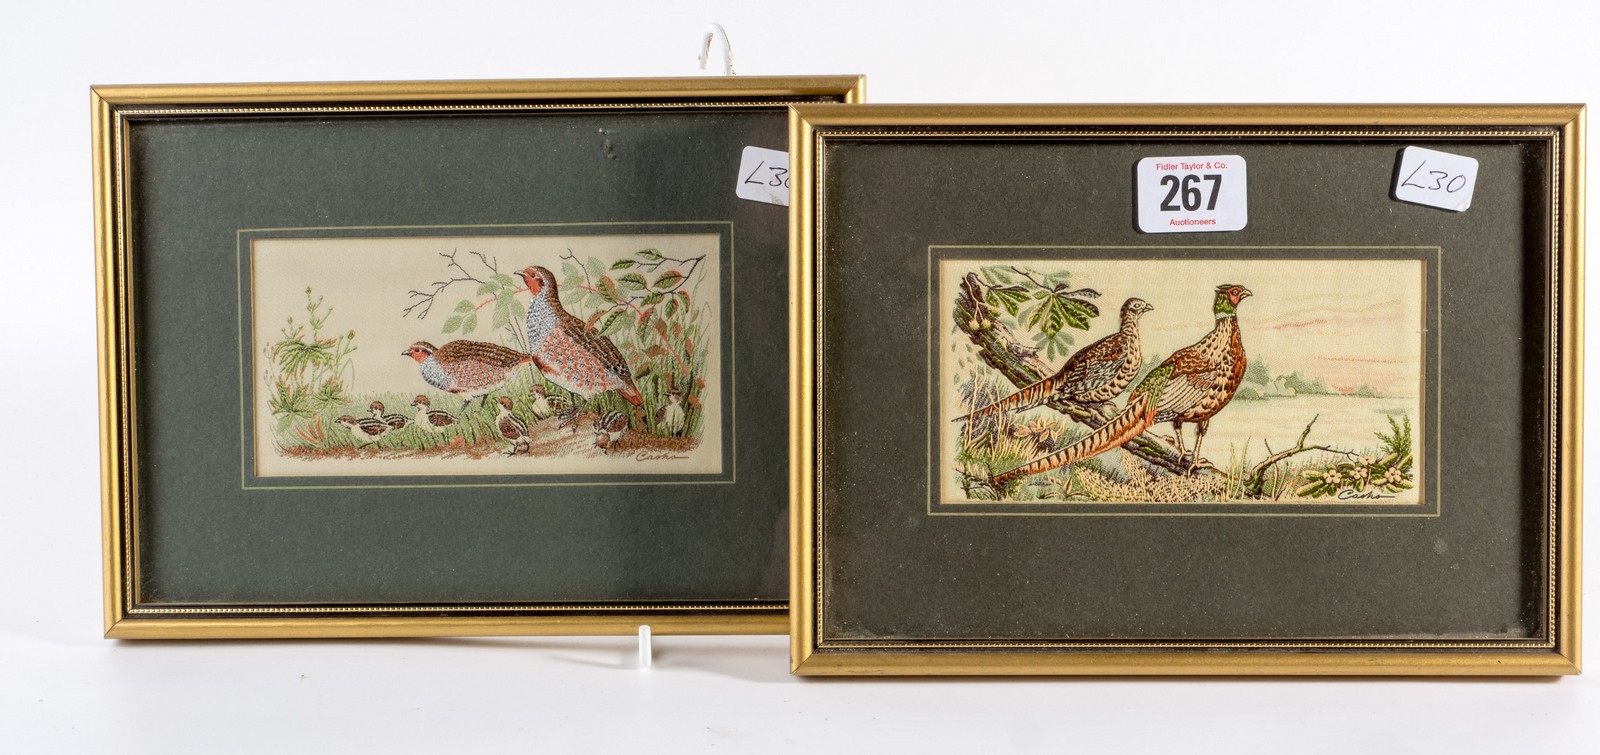 2 Frd & Gld silk works “Pheasant” and “Grouse”